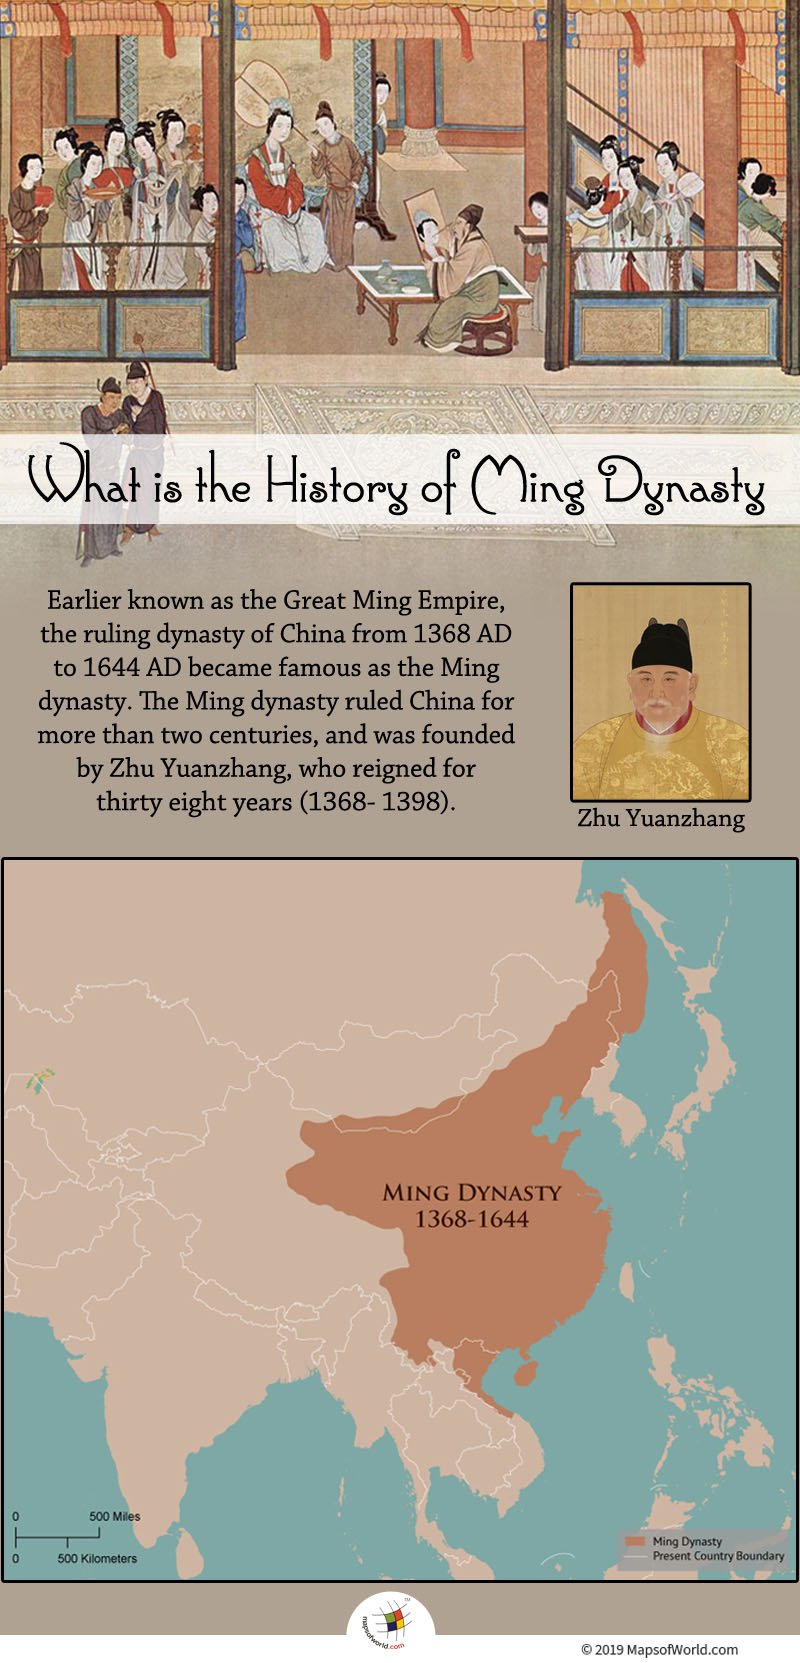 The Ming dynasty ruled China for more than two centuries